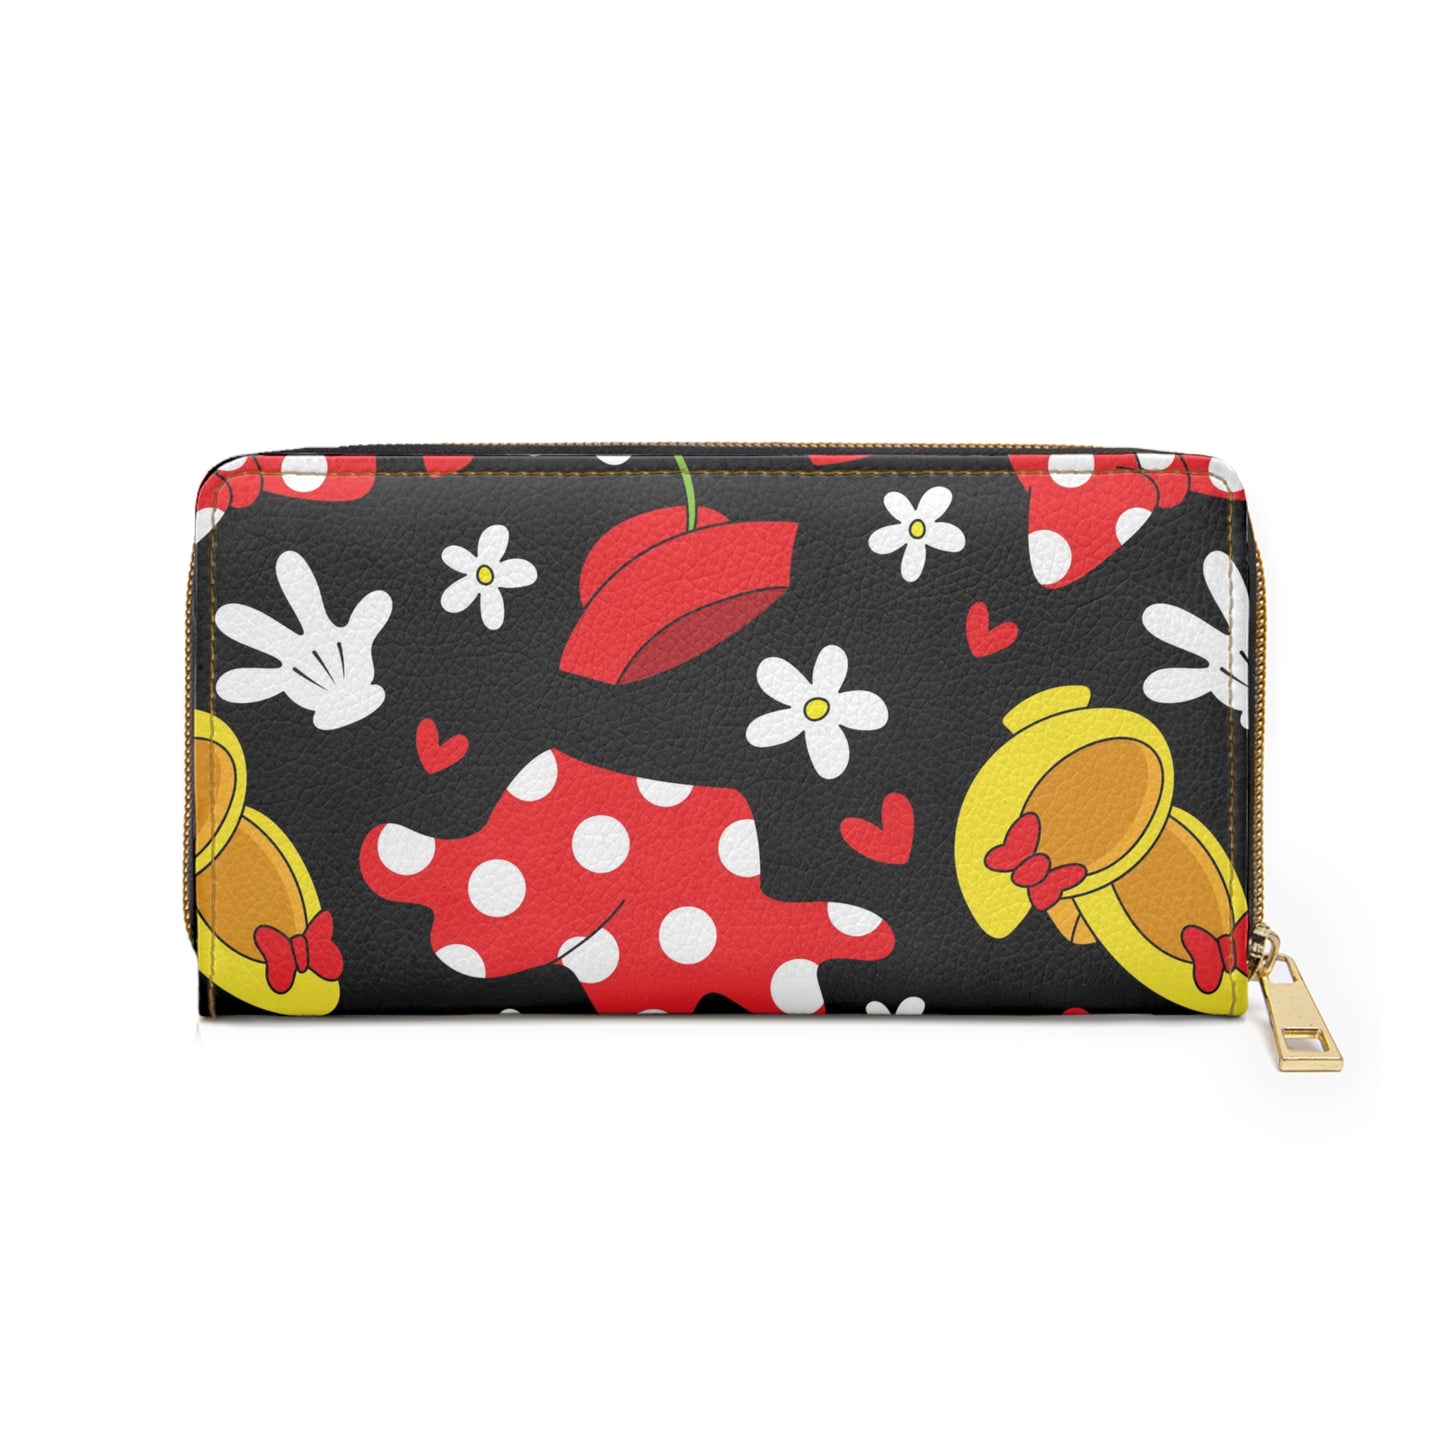 All About The Bows Zipper Wallet